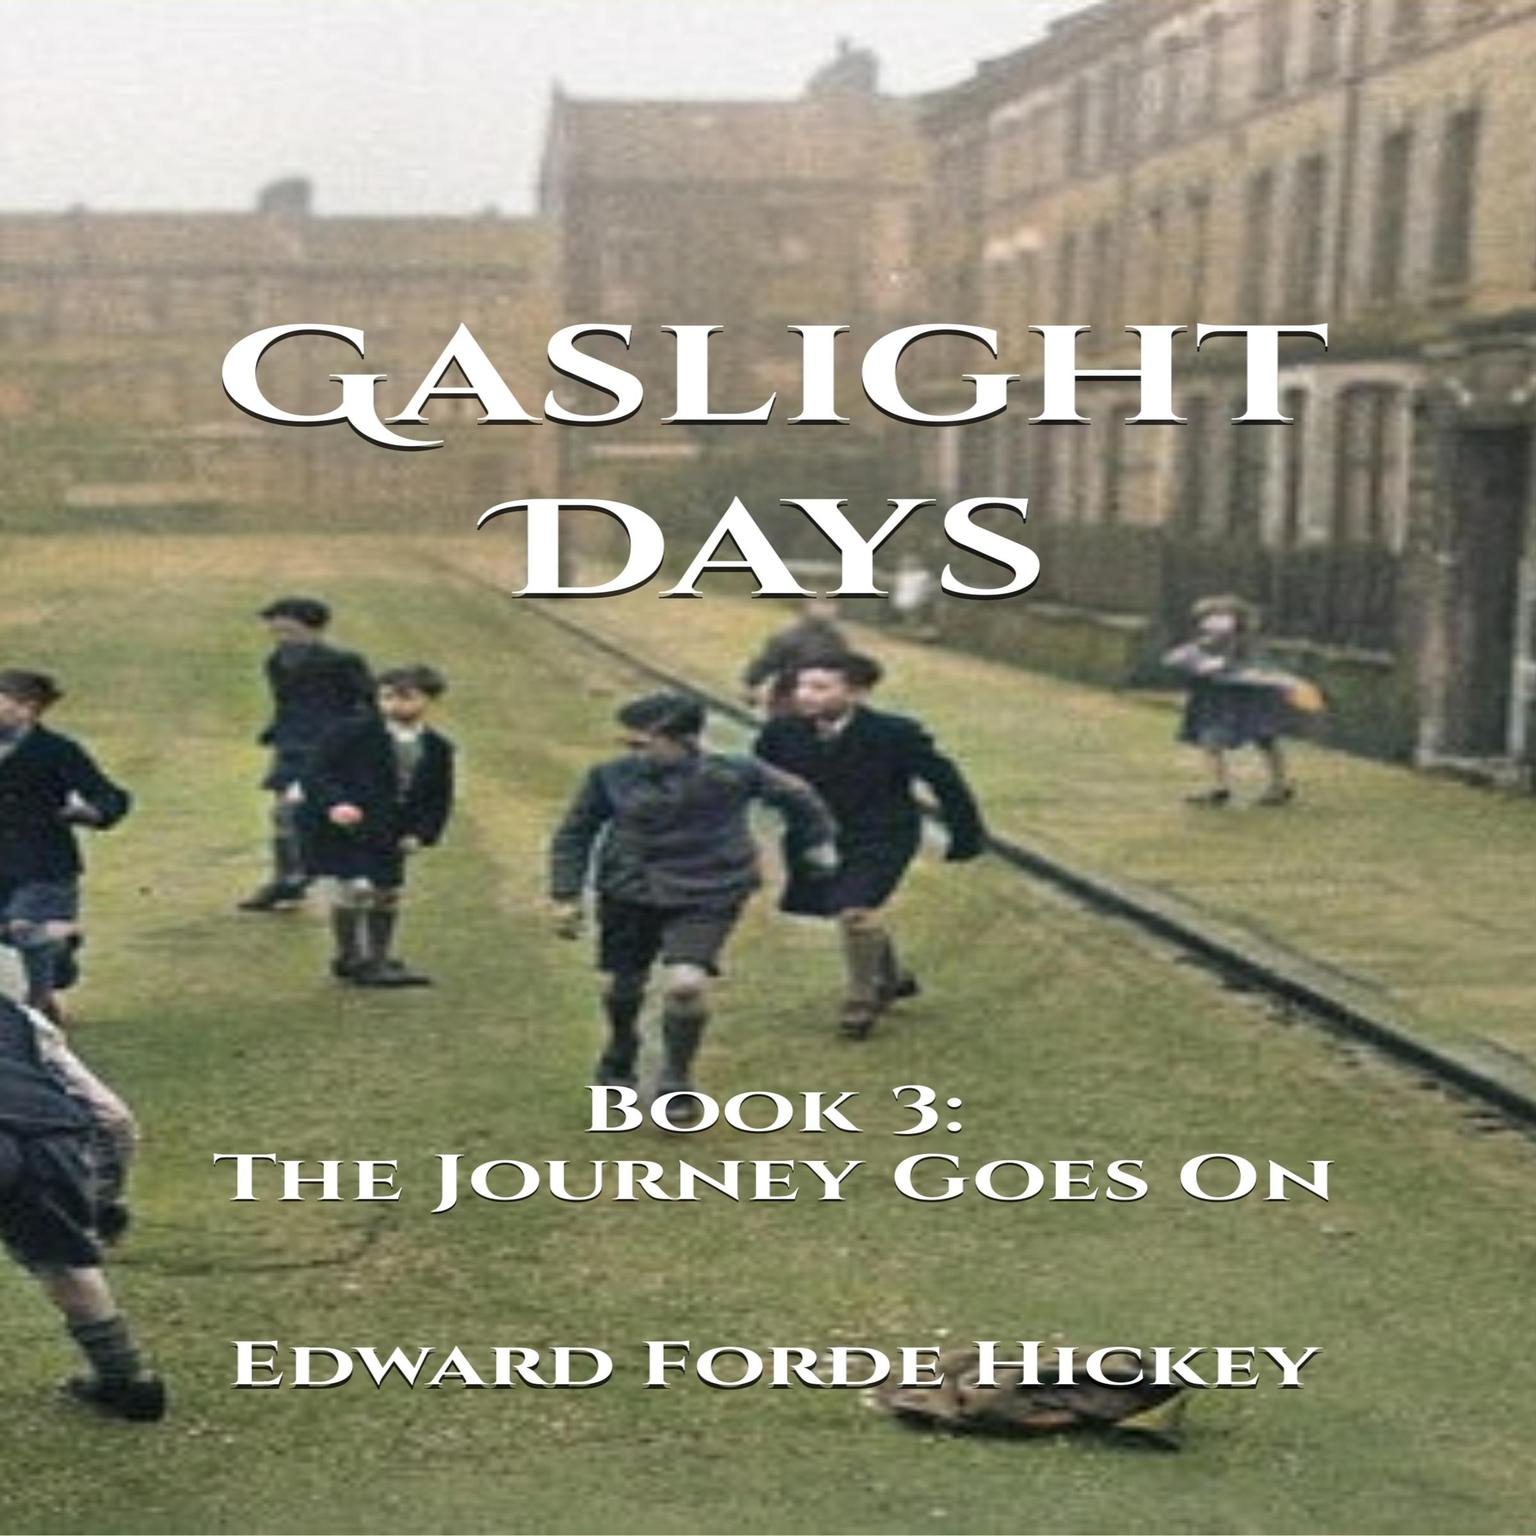 Gaslight Days: Book 3 - The Journey Goes On Audiobook, by Edward Forde Hickey